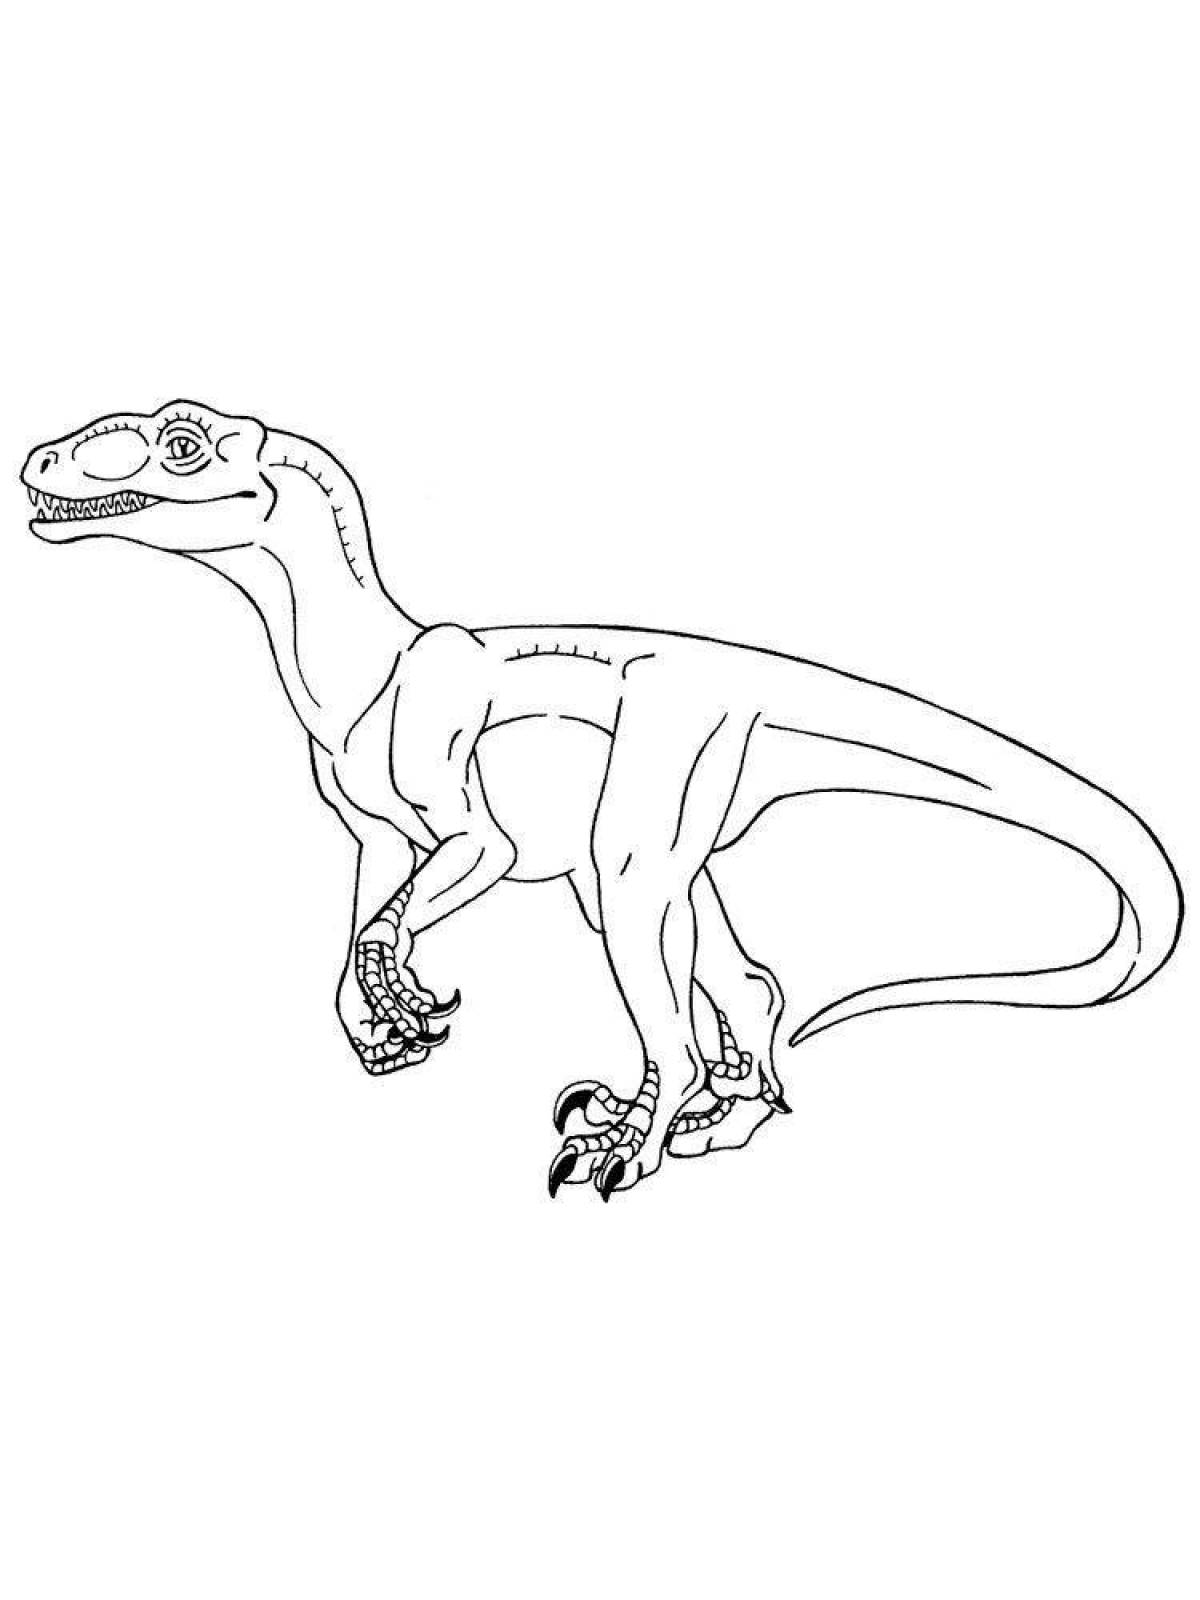 Coloring page magical velociraptor